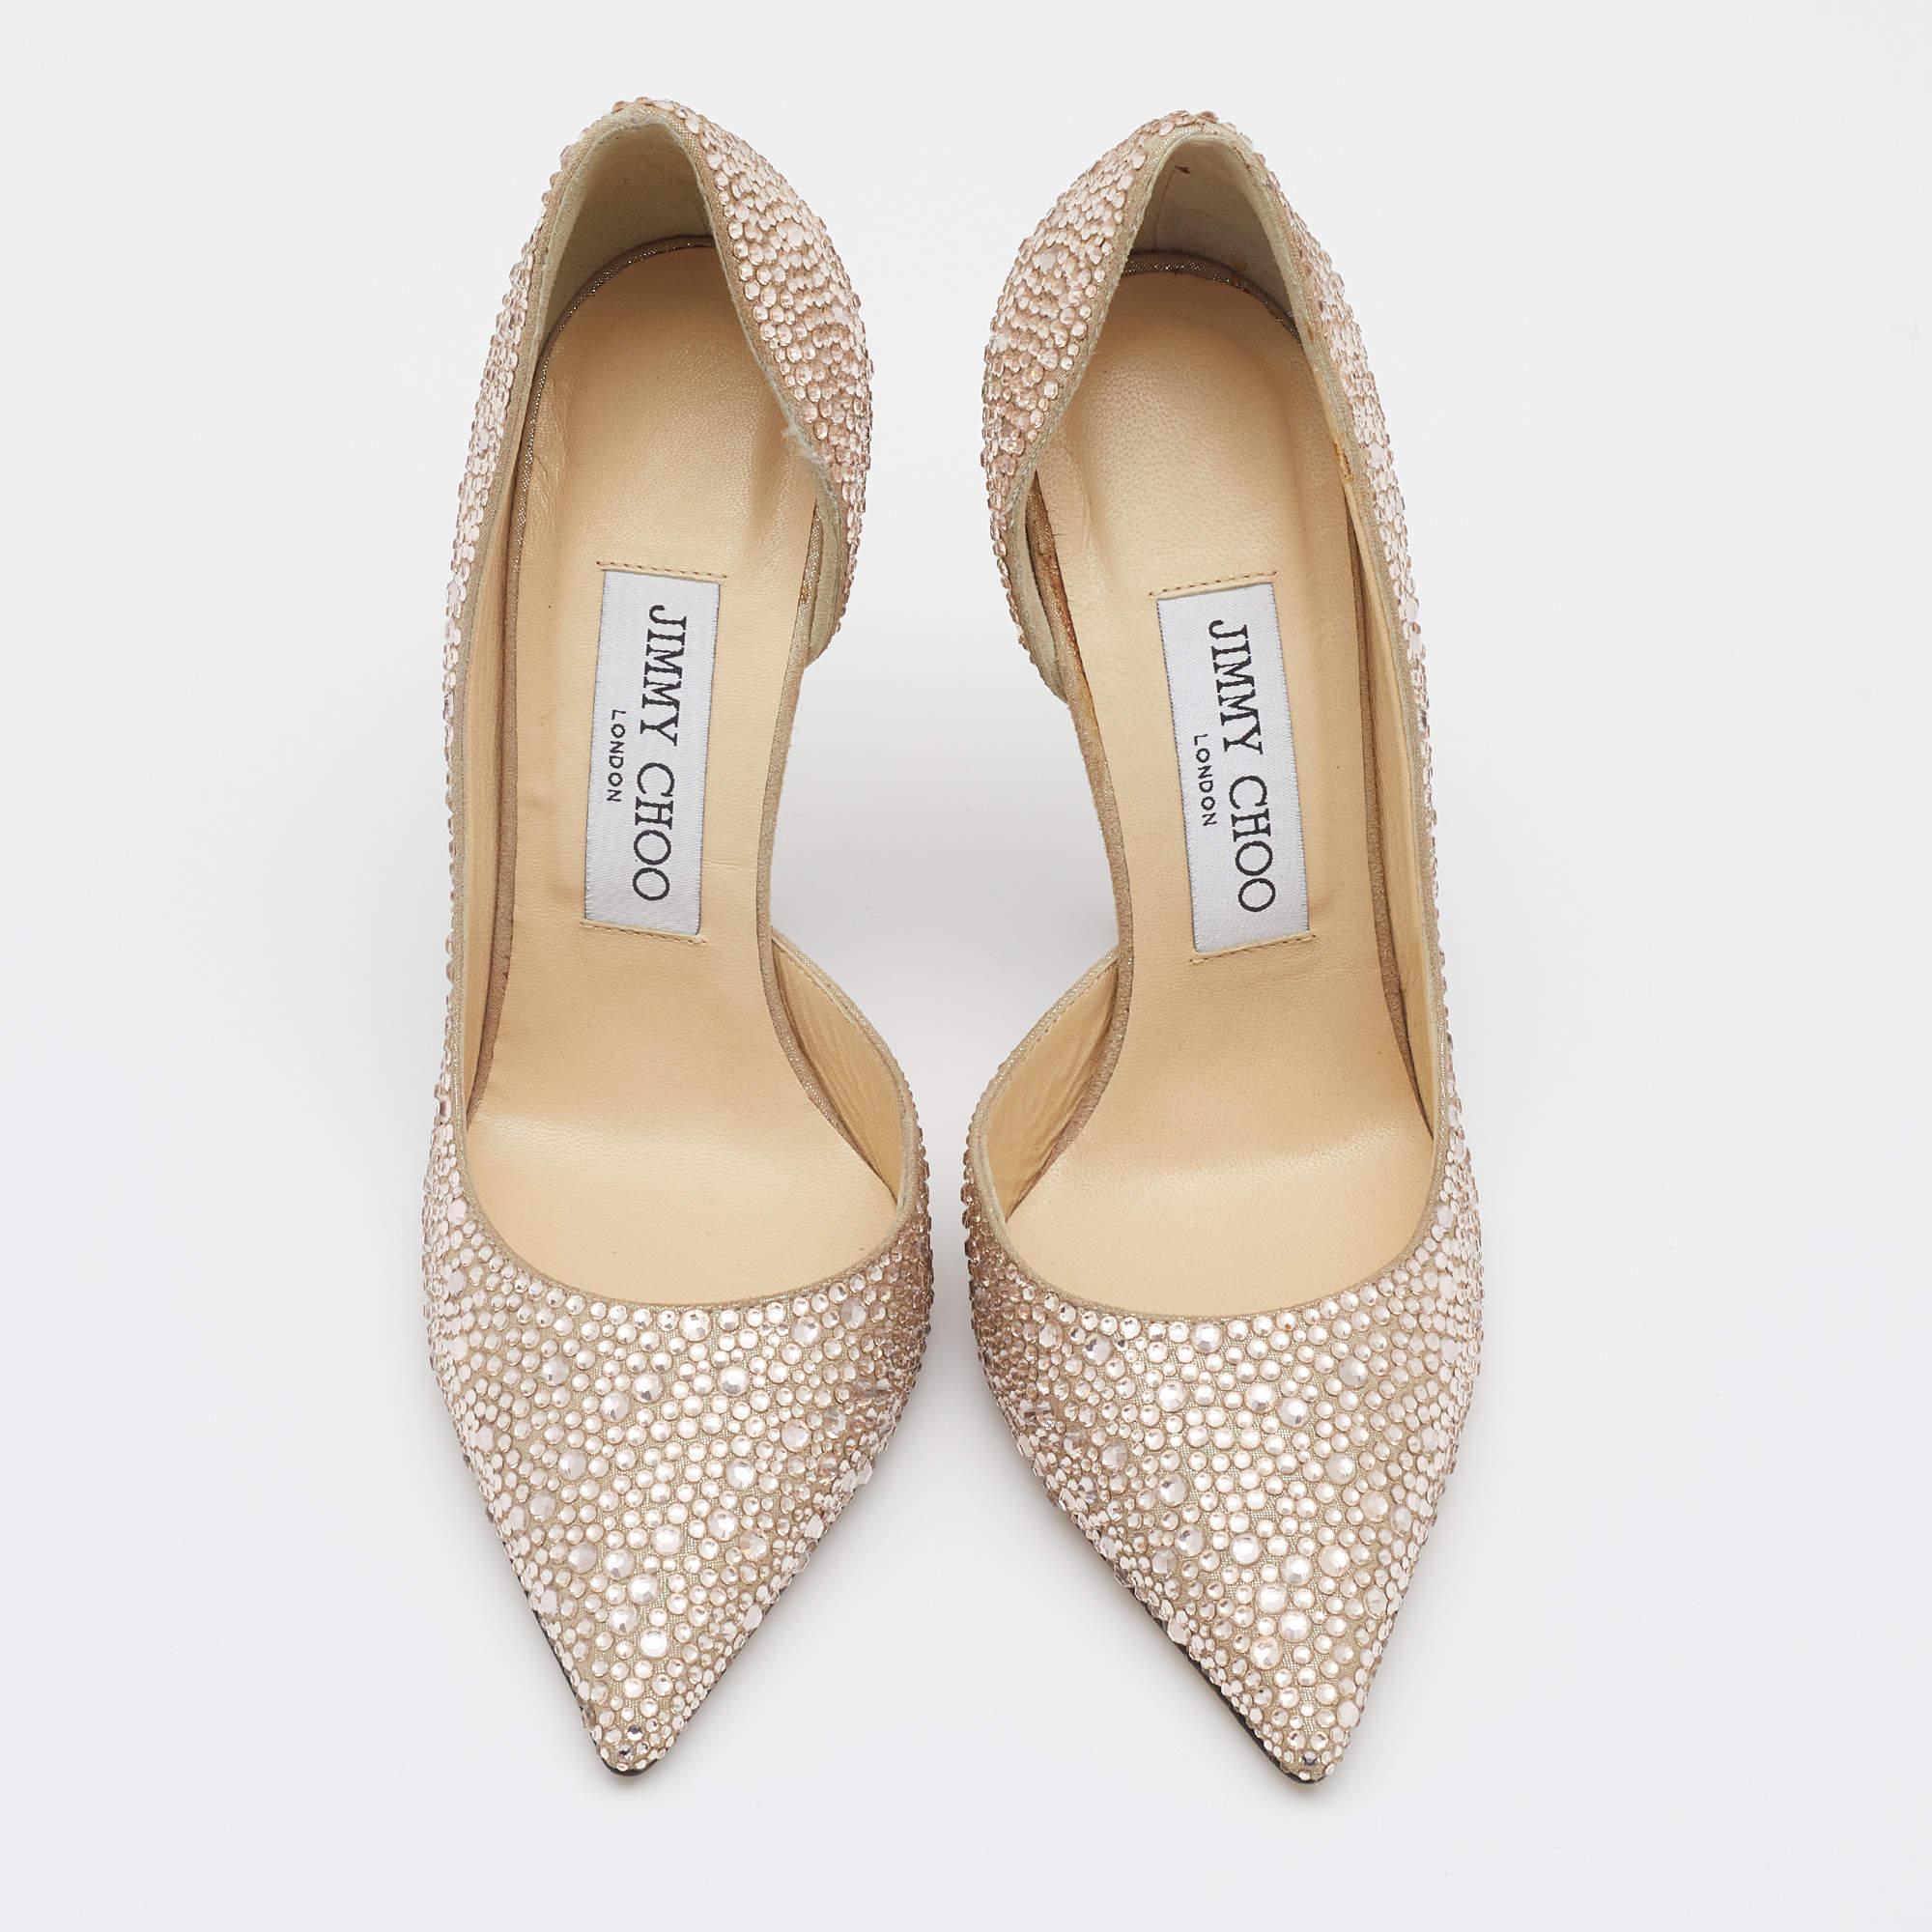 Jimmy Choo’s glamorous spirit enlivens in these stunning pumps that will add oodles of style to your ensemble. Crafted from beige suede, these d'Orsay pumps are embellished with crystals all over on uppers for an opulent touch. These gorgeous